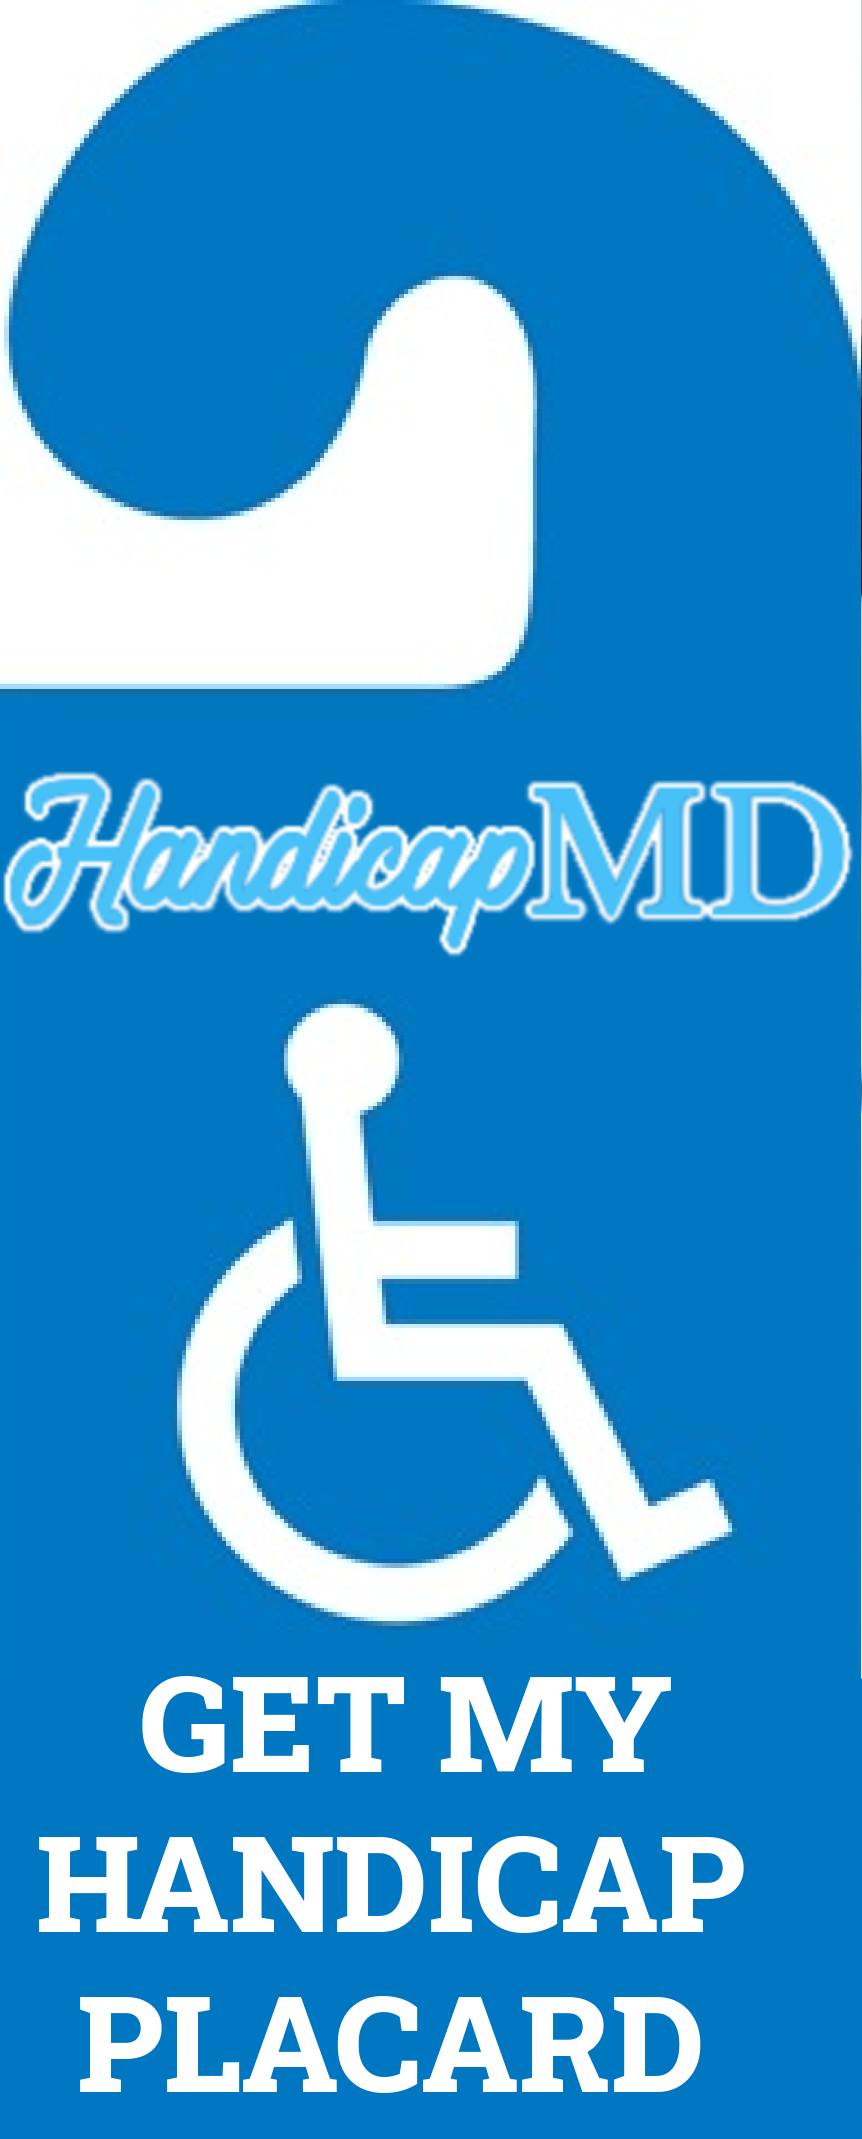 The Impact of Handicap Placard Abuse and How to Report it in Wisconsin